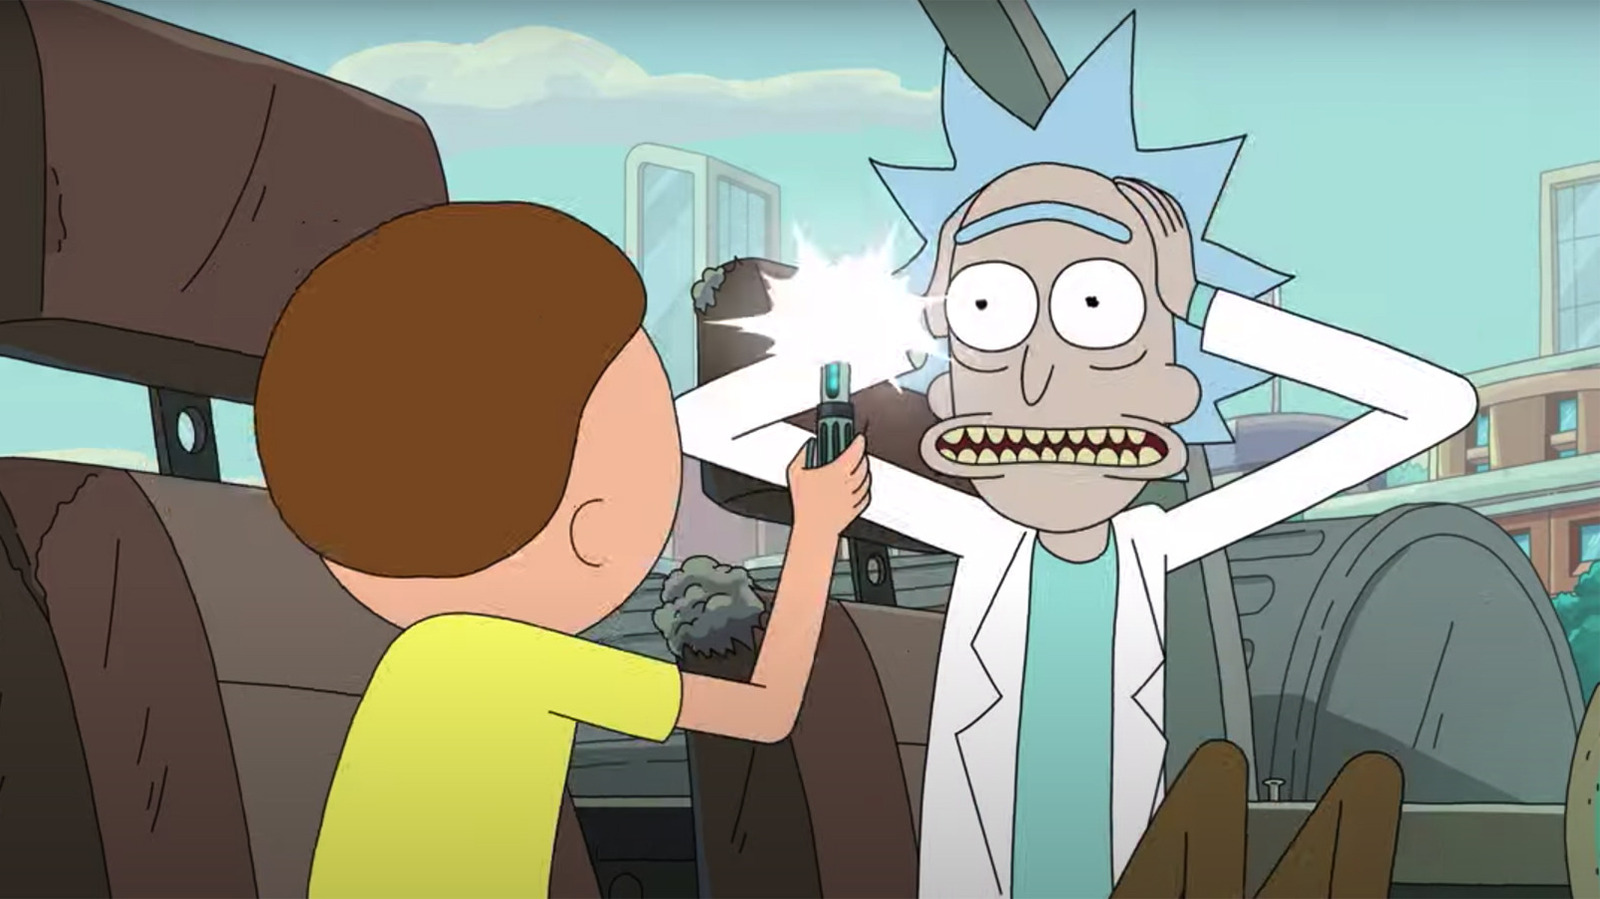 The Rick And Morty Season 7 Trailer Debuts The New Soundalike Voices Replacing Justin Roiland